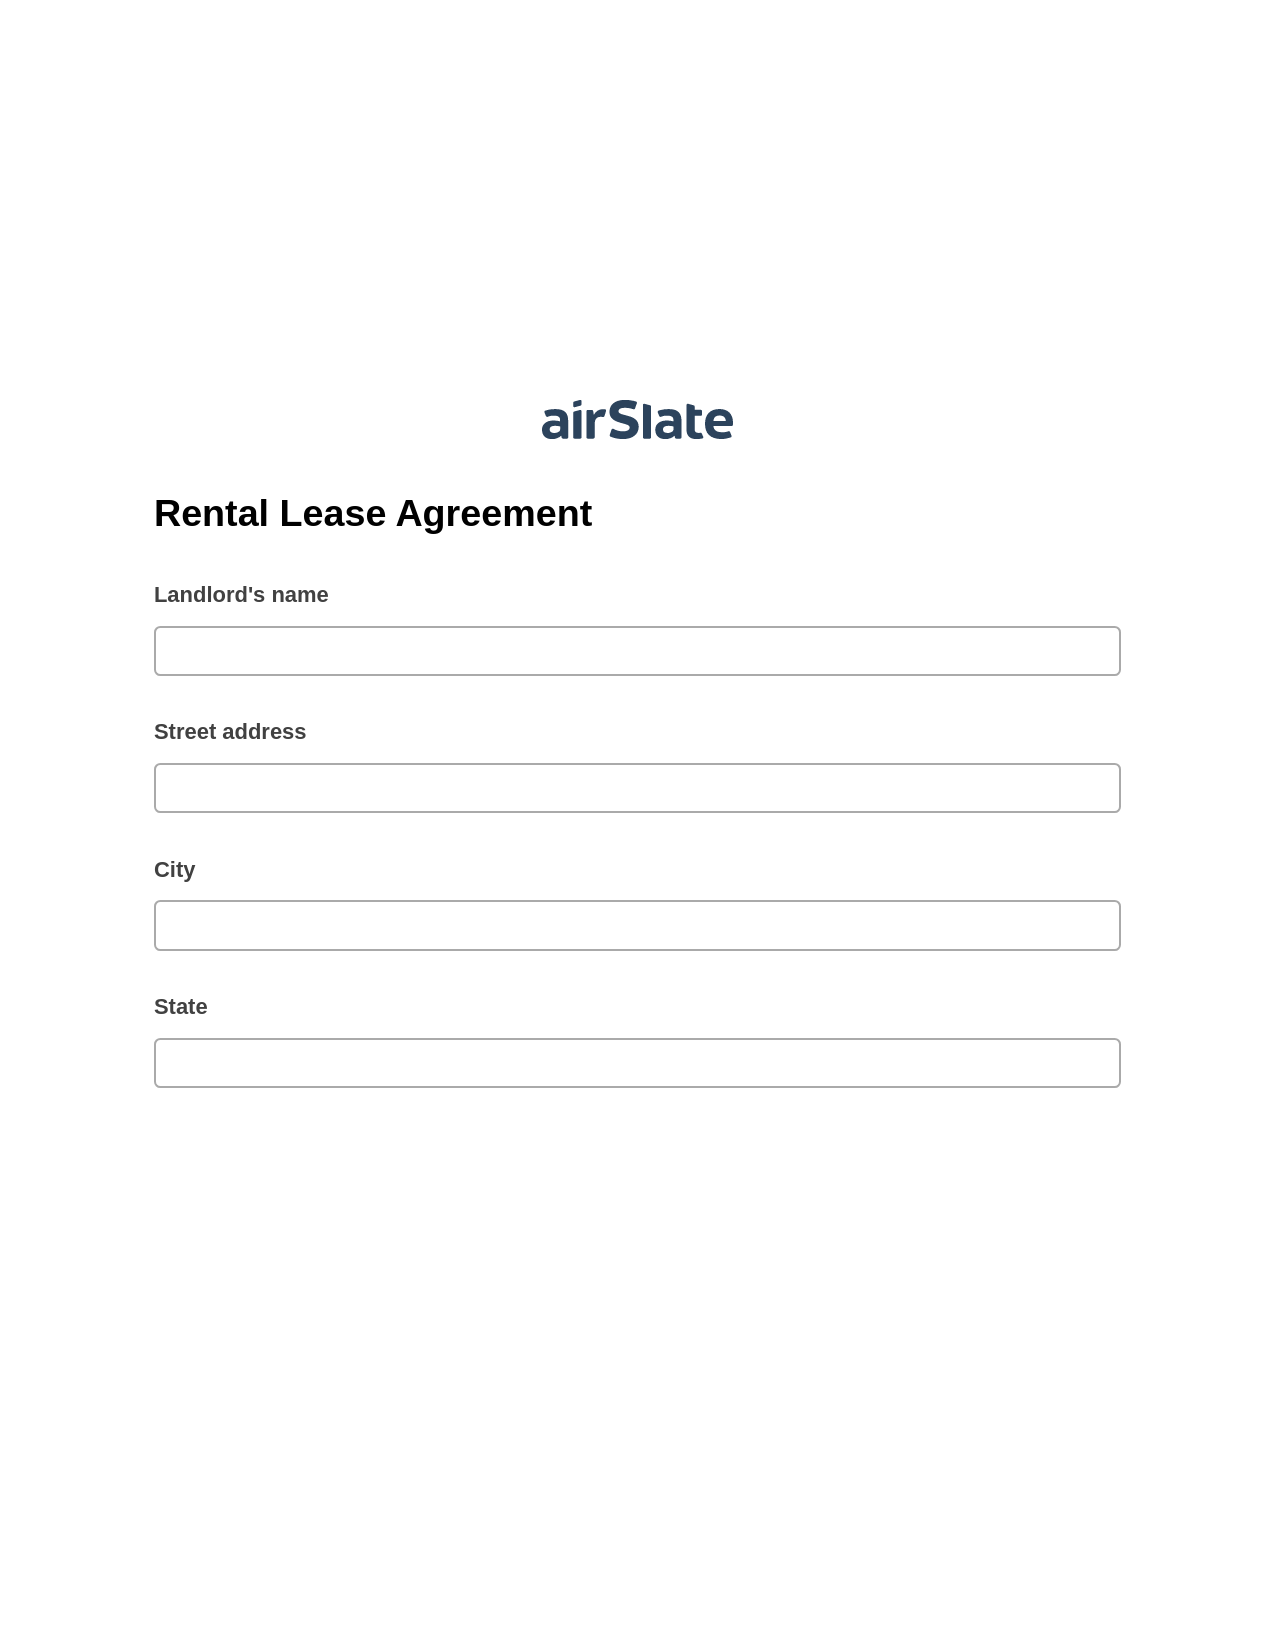 Rental Lease Agreement Pre-fill Slate from MS Dynamics 365 Records Bot, Mailchimp send Campaign bot, Google Drive Bot